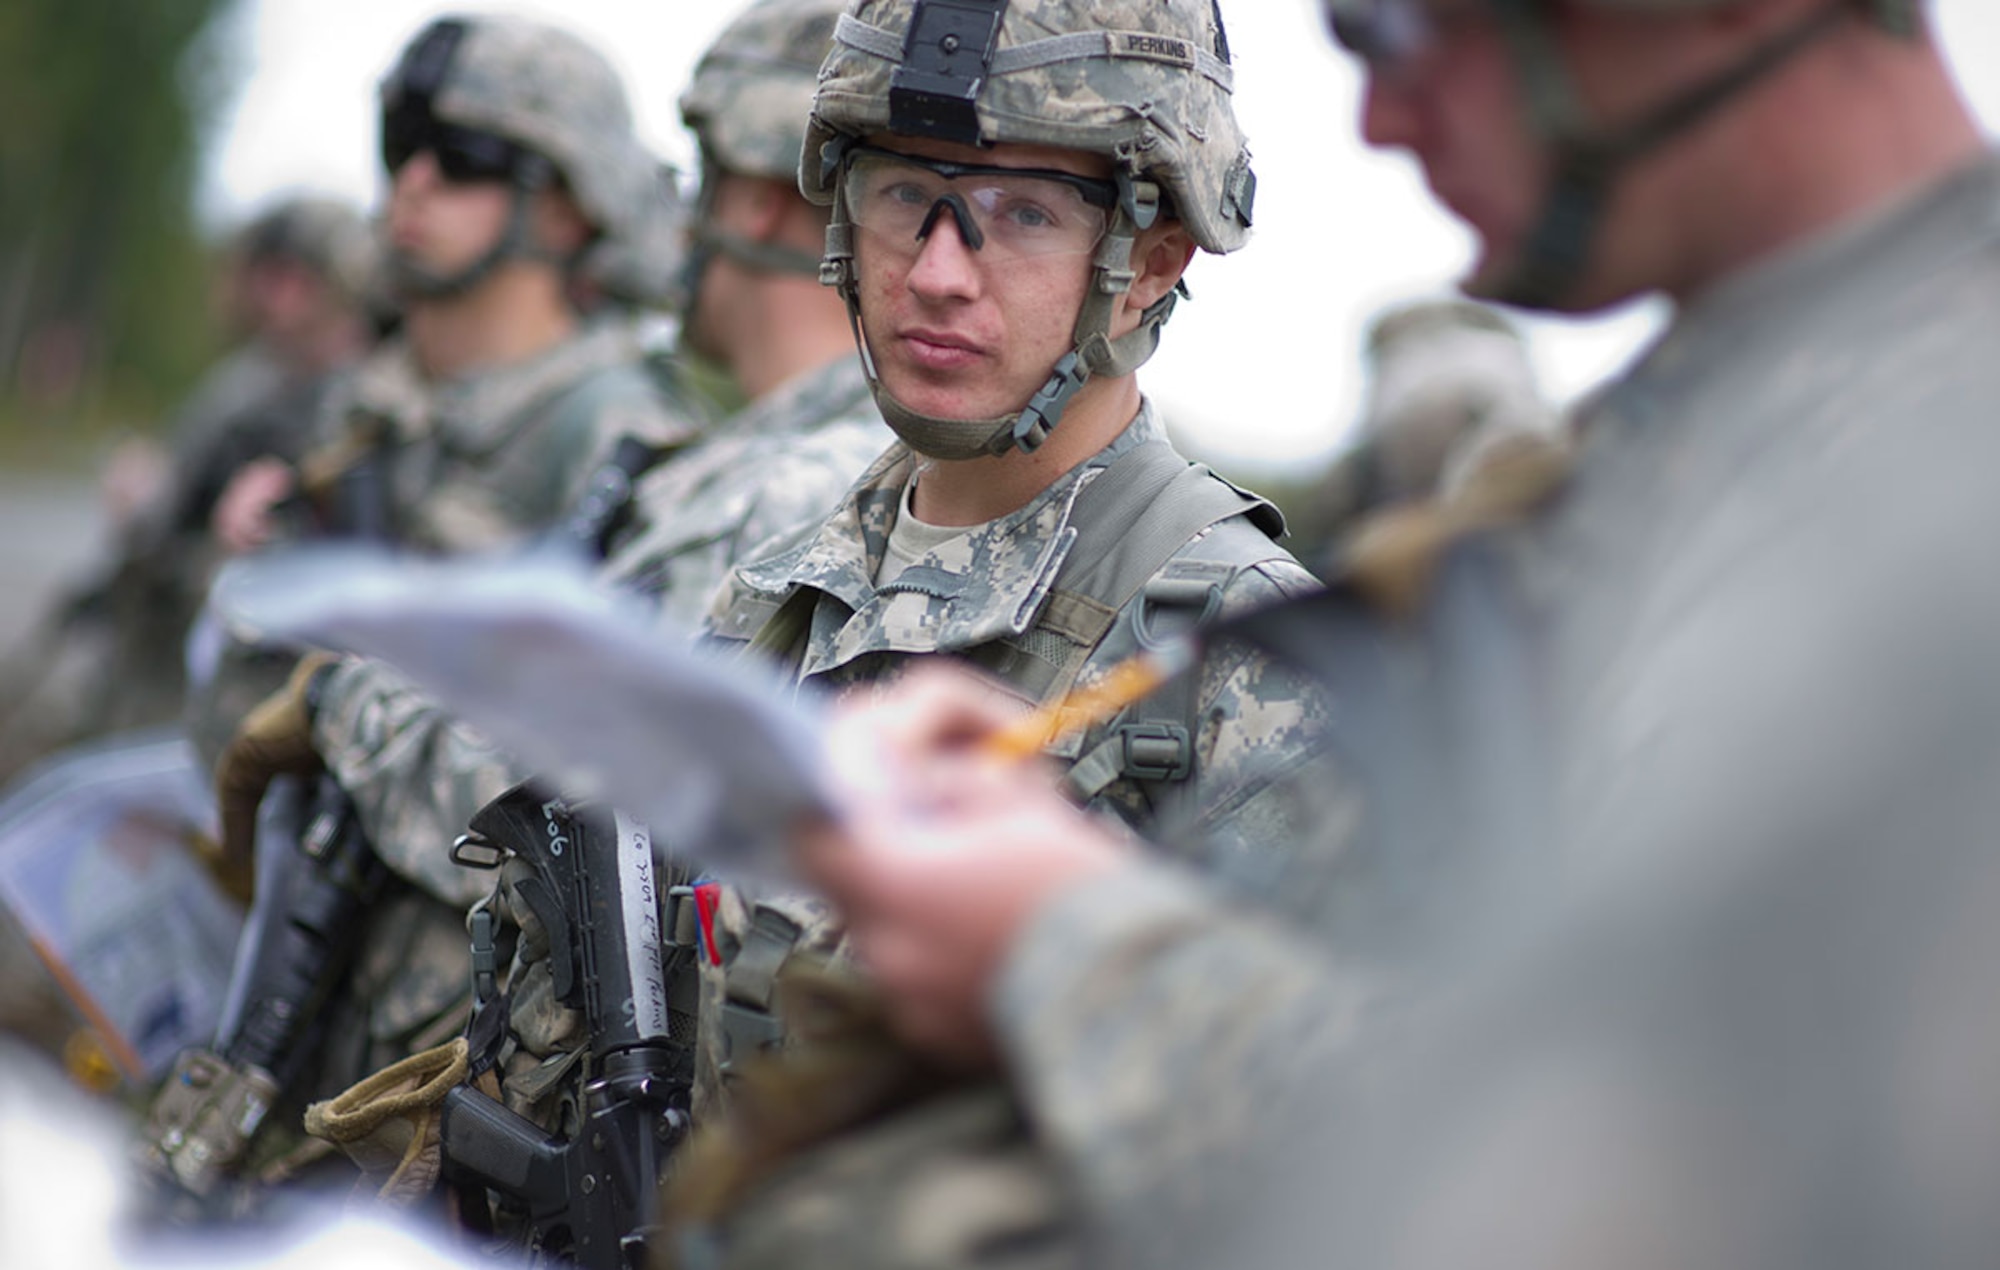 Spc. Walker Perkins, a native of Lee, Maine, assigned to U.S. Army Alaska's 4th Infantry Brigade Combat Team (Airborne), 25th Infantry Division, prepares to test on the land navigation course during Expert Infantryman Badge qualification on Joint Base Elmendorf-Richardson, Tuesday, Sept. 9, 2014. The Expert Infantryman Badge was approved by the Secretary of War on October 7, 1943, and is currently awarded to U.S. Army personnel who hold infantry or special forces military occupational specialties and successfully pass the rigors of the course. (U.S. Air Force photo/Justin Connaher)